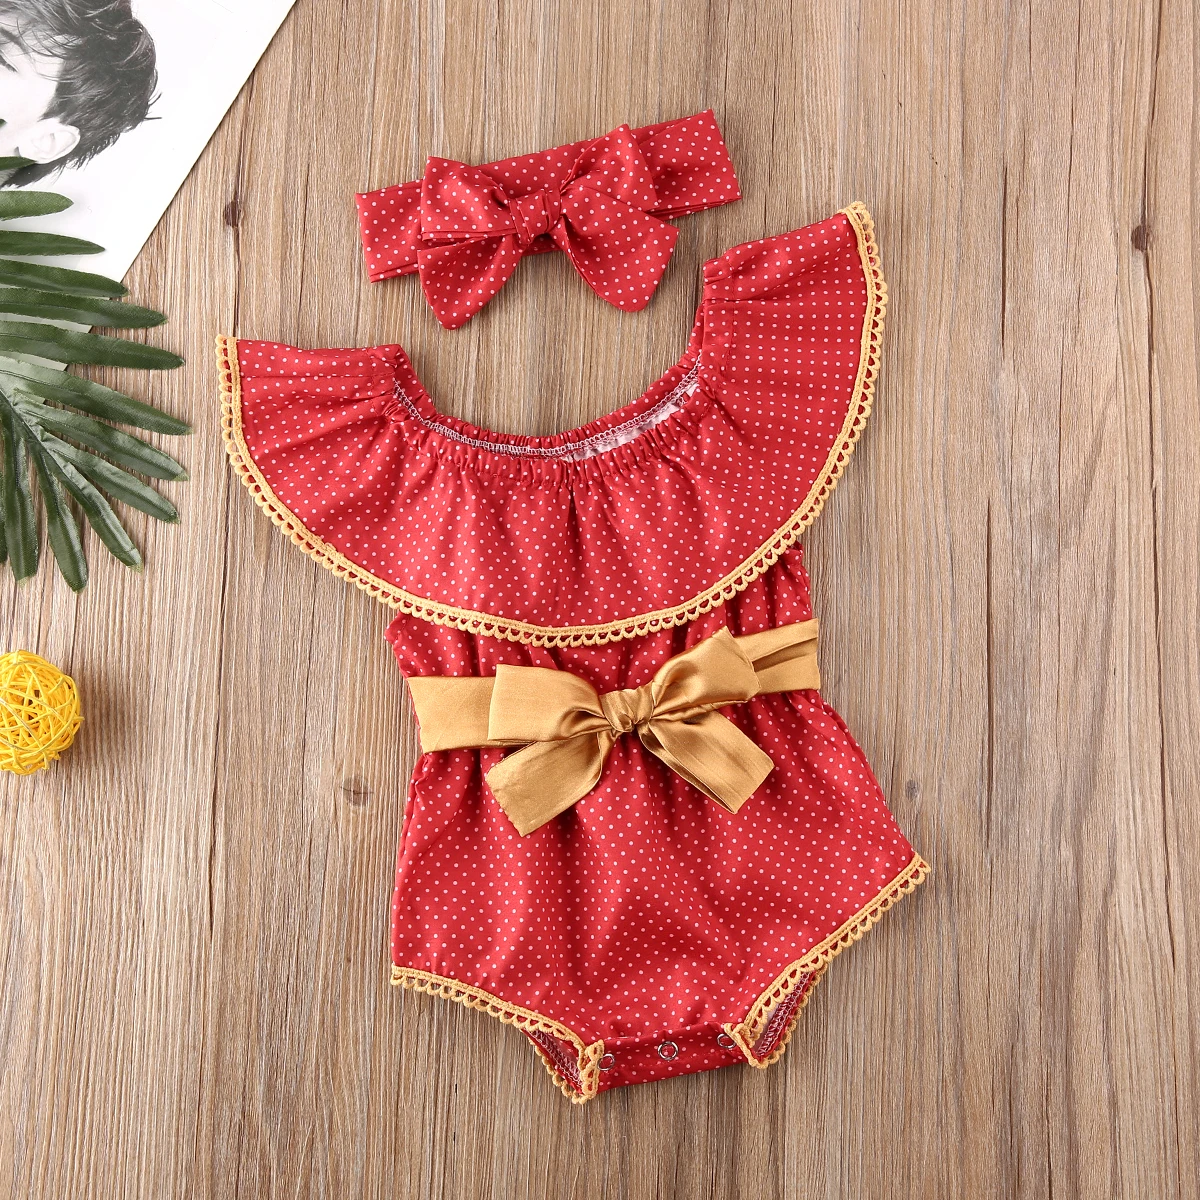 US Christmas Clothes Baby Girl Clothes Romper Jumpsuit Playsuit Headband Outfits Sunsuit Clothes 0-24 months